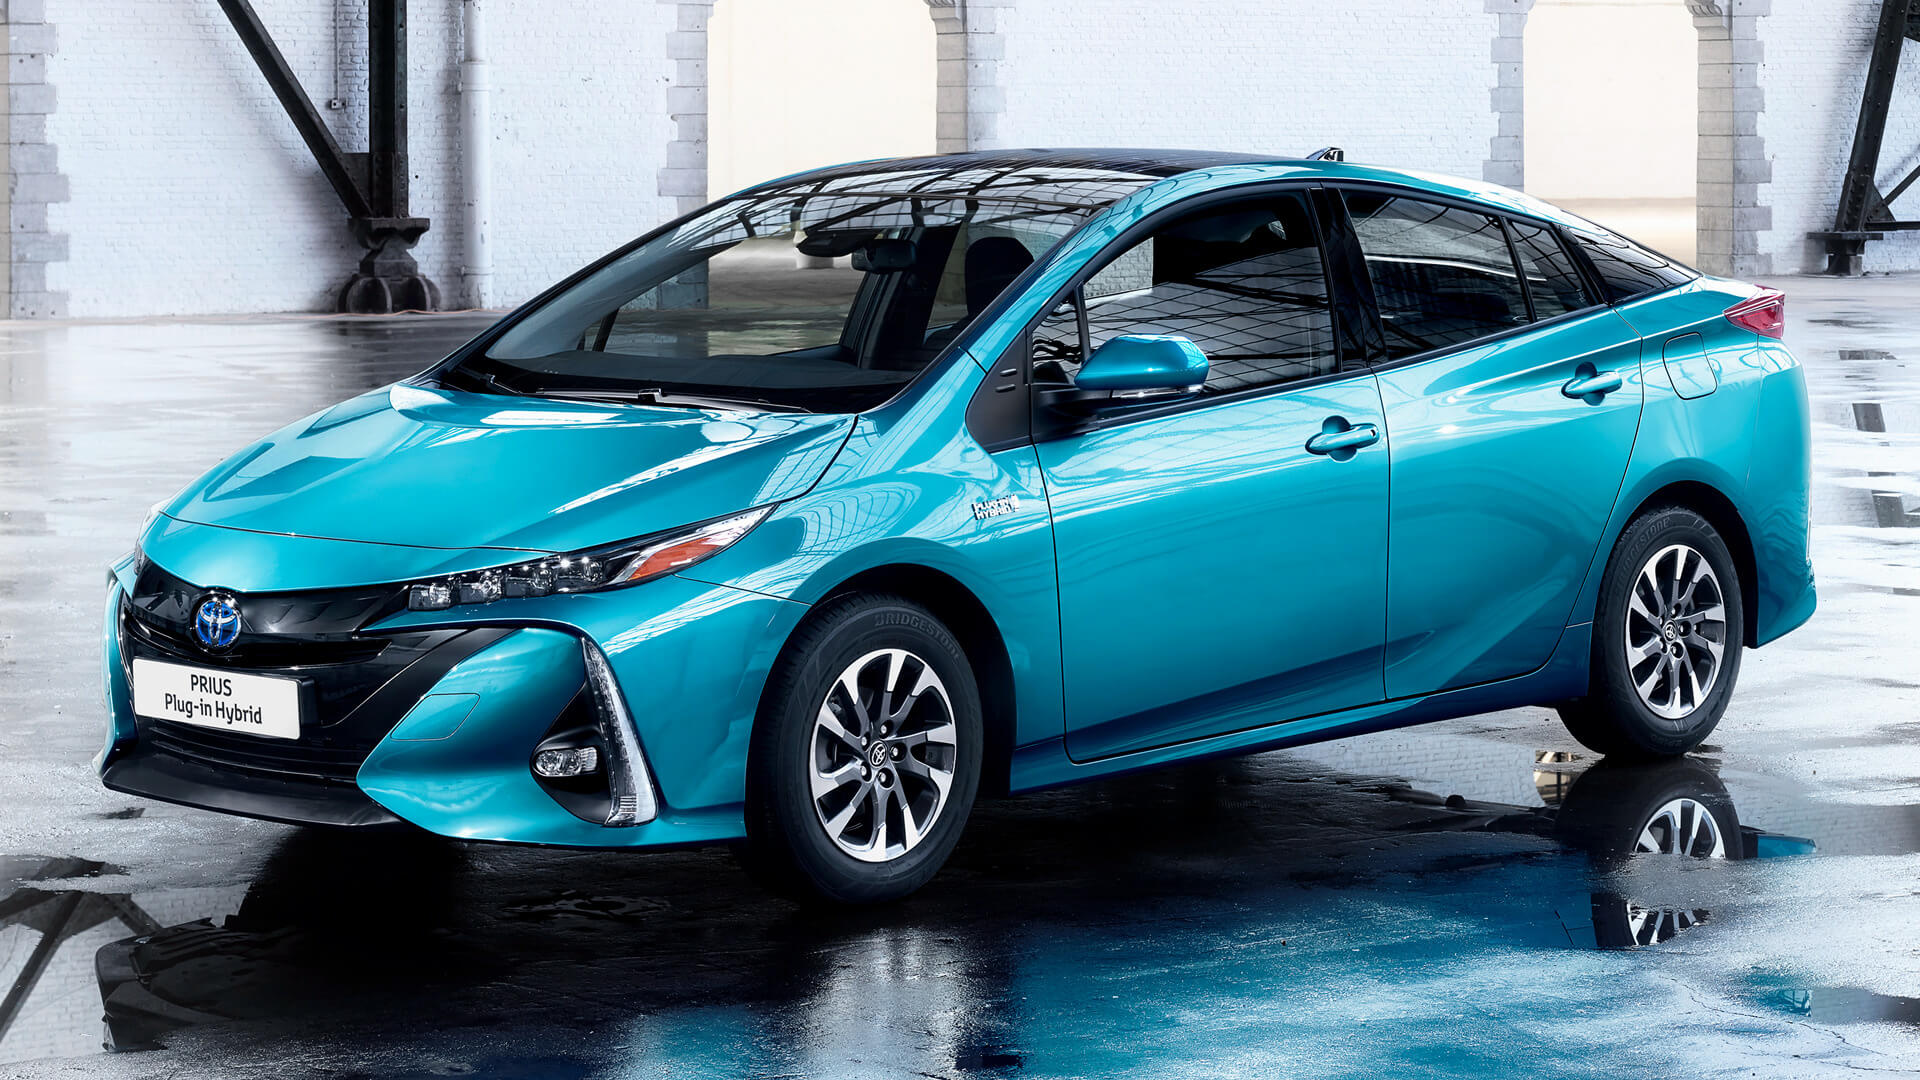 The new Toyota Prius will a Plugin hybrid